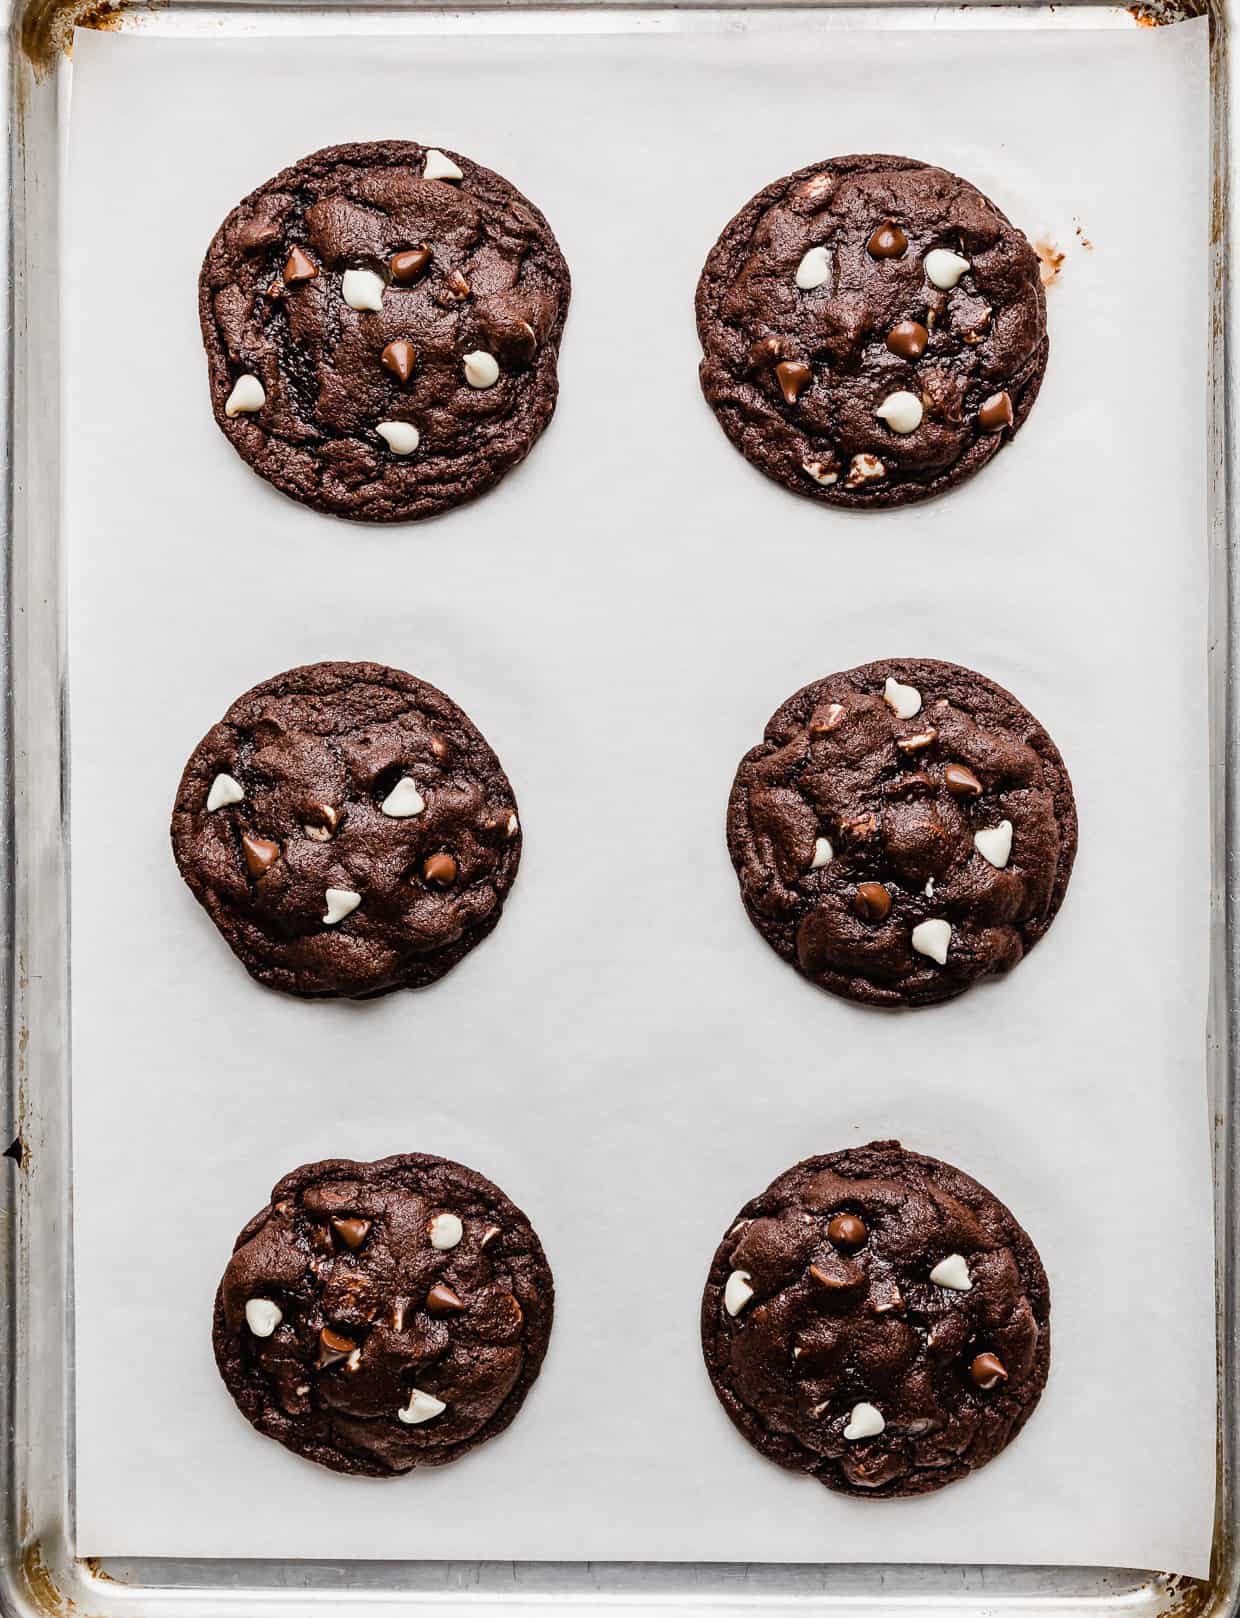 Baked Triple Chocolate Chip Cookies on a baking sheet.